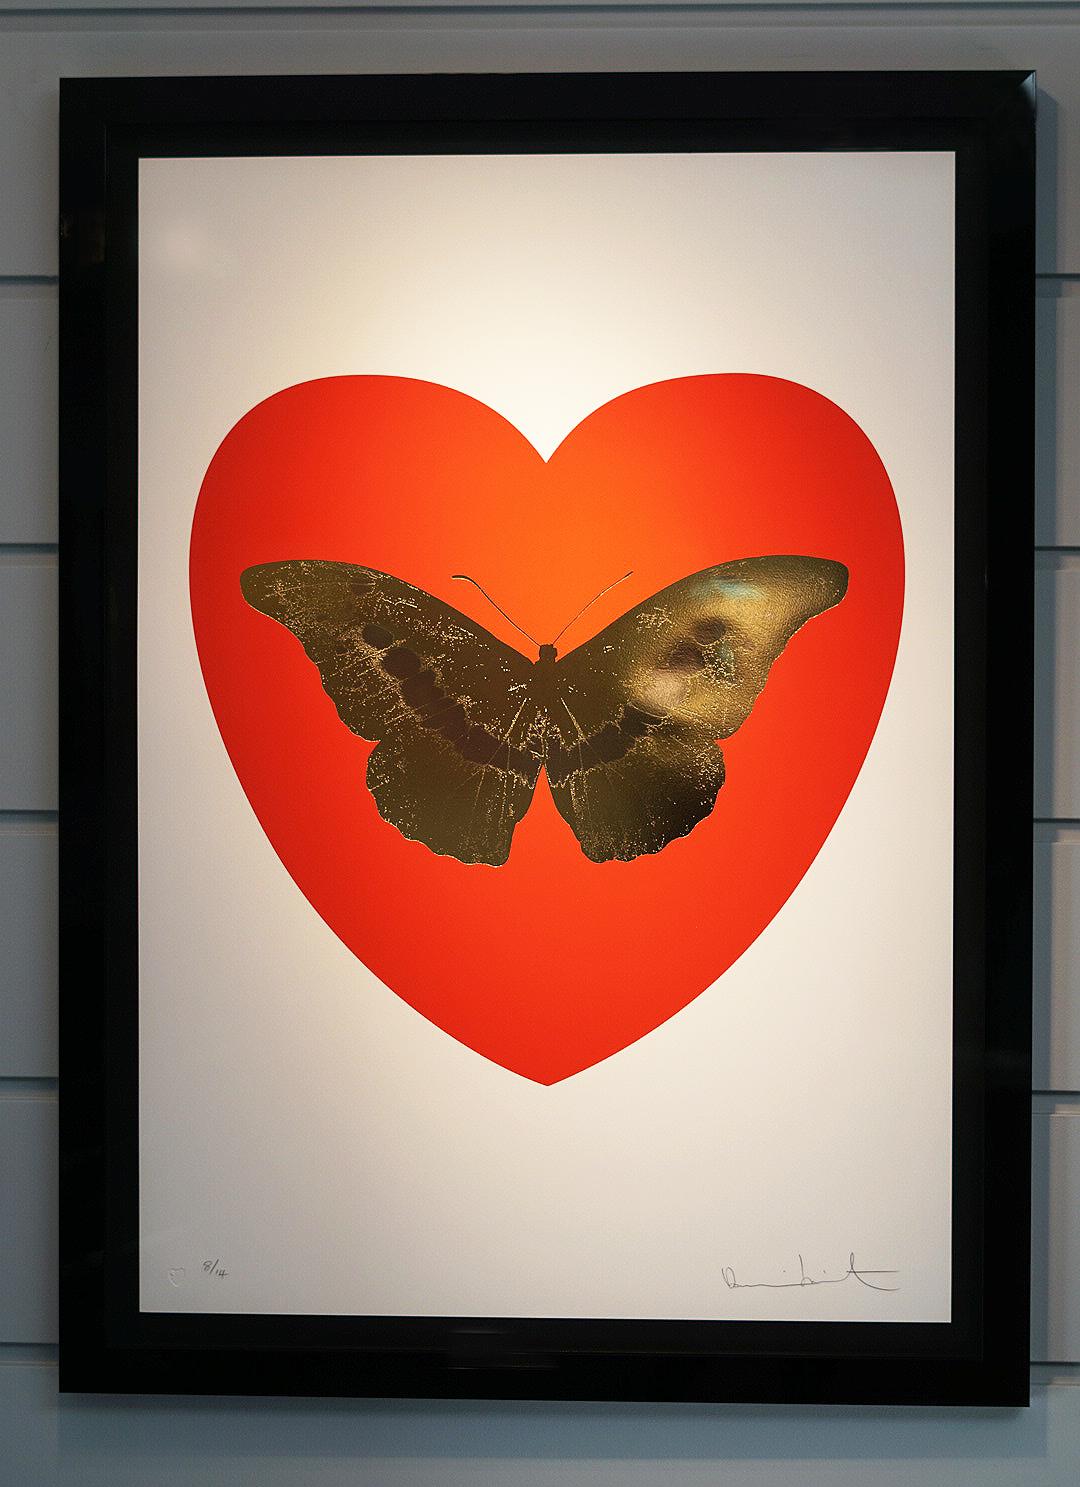 This series 'I Love You' is created in Damien Hirst's signature style, using butterflies as a symbolism for the celebration of life. This particular work features a 'Poppy Red' heart with gold foil-block on Somerset Satin 410gsm paper.

Small